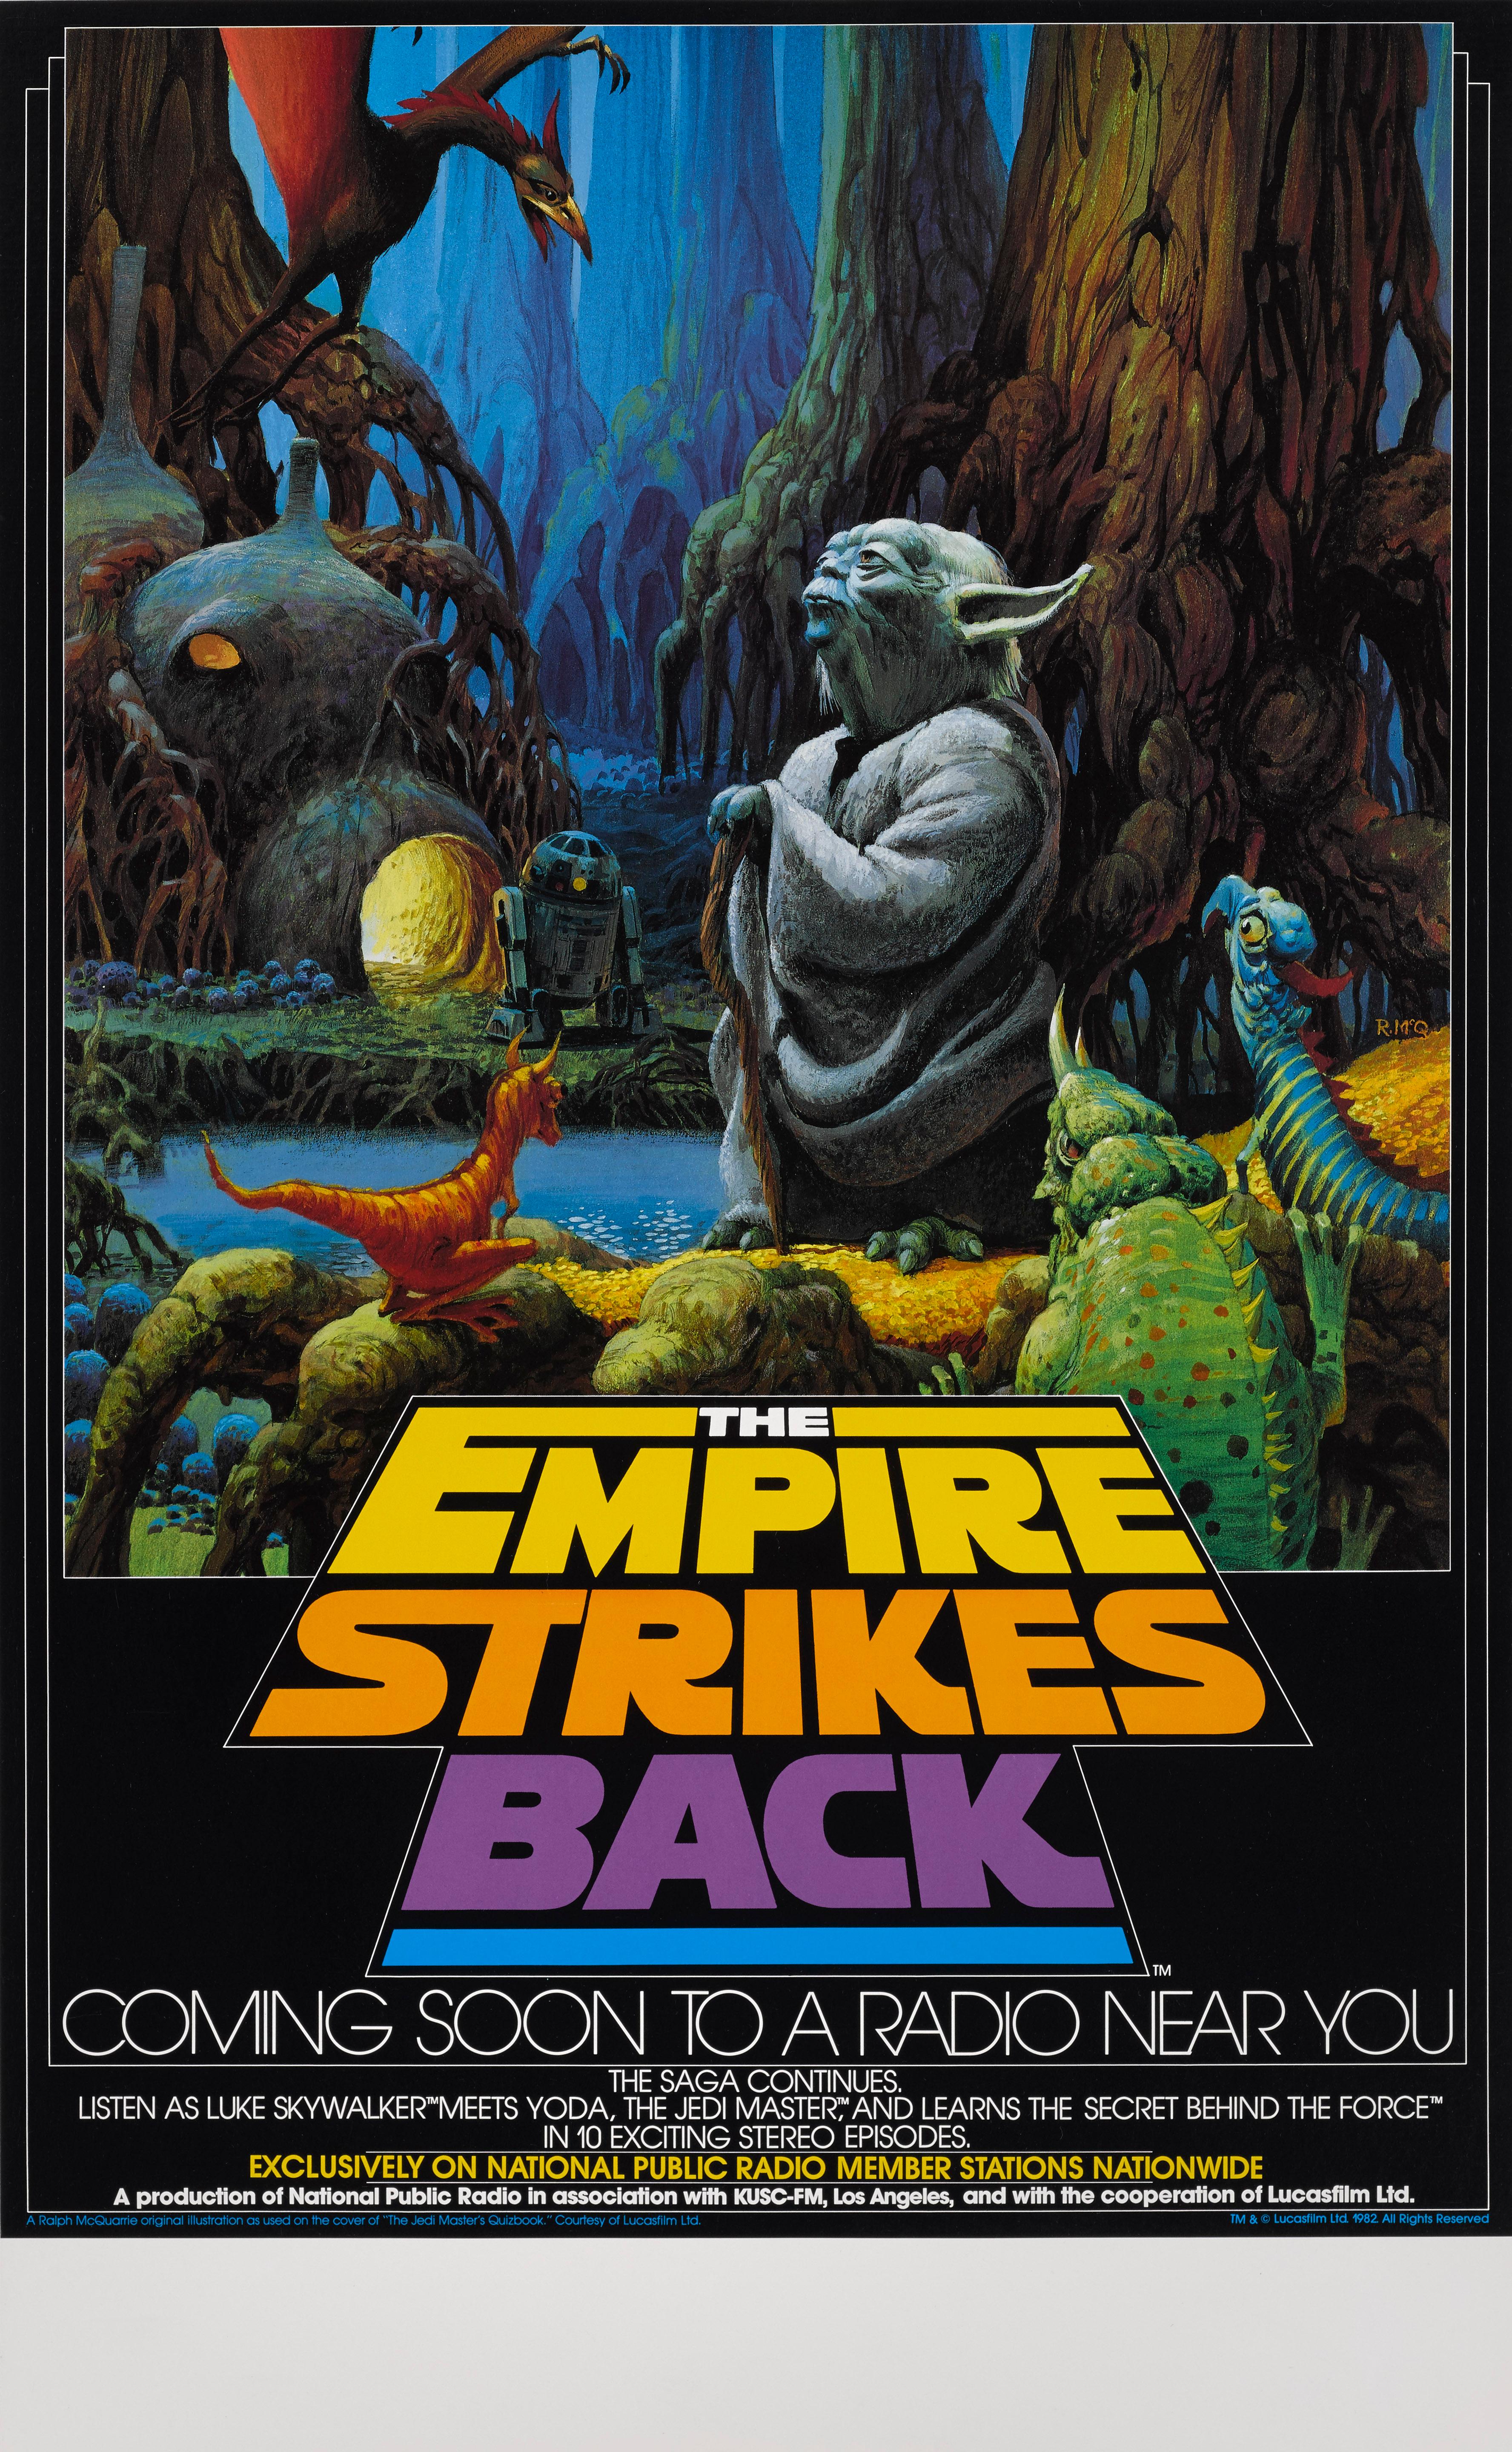 Original American poster for “The Empire Strikes Back” also known as (Star Wars: Episode V, The Empire Strikes Back) this was the second movie in the Star Wars saga staring Mark Hamill, Harrison Ford, Carrie Fisher and Billy Dee Williams. The art